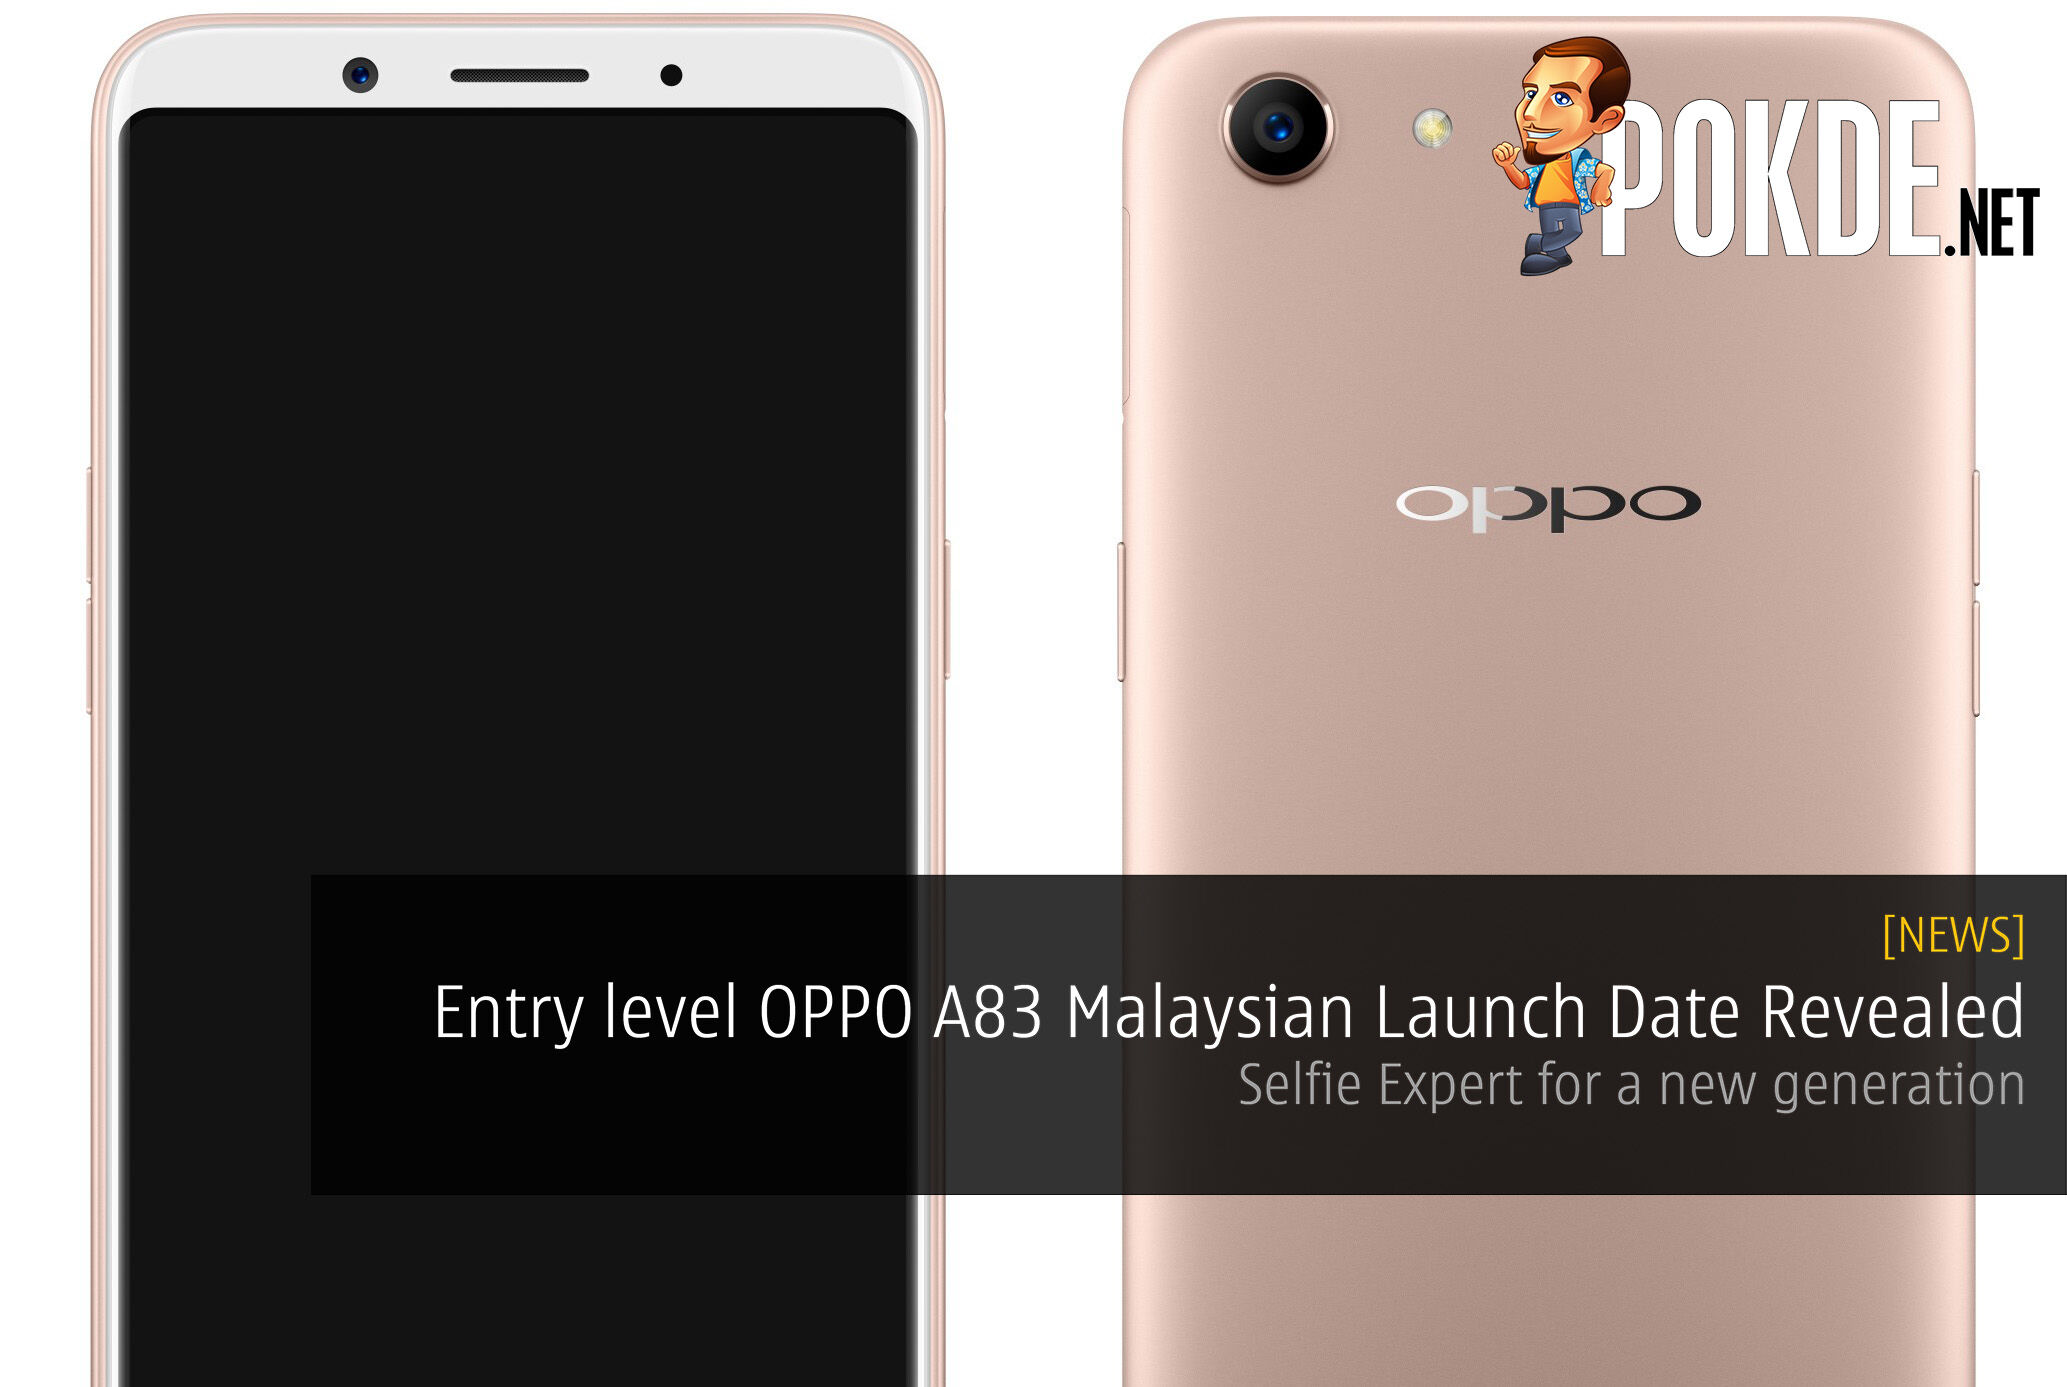 Entry-level OPPO A83 Malaysian Launch Date Revealed - Coming very soon! 30